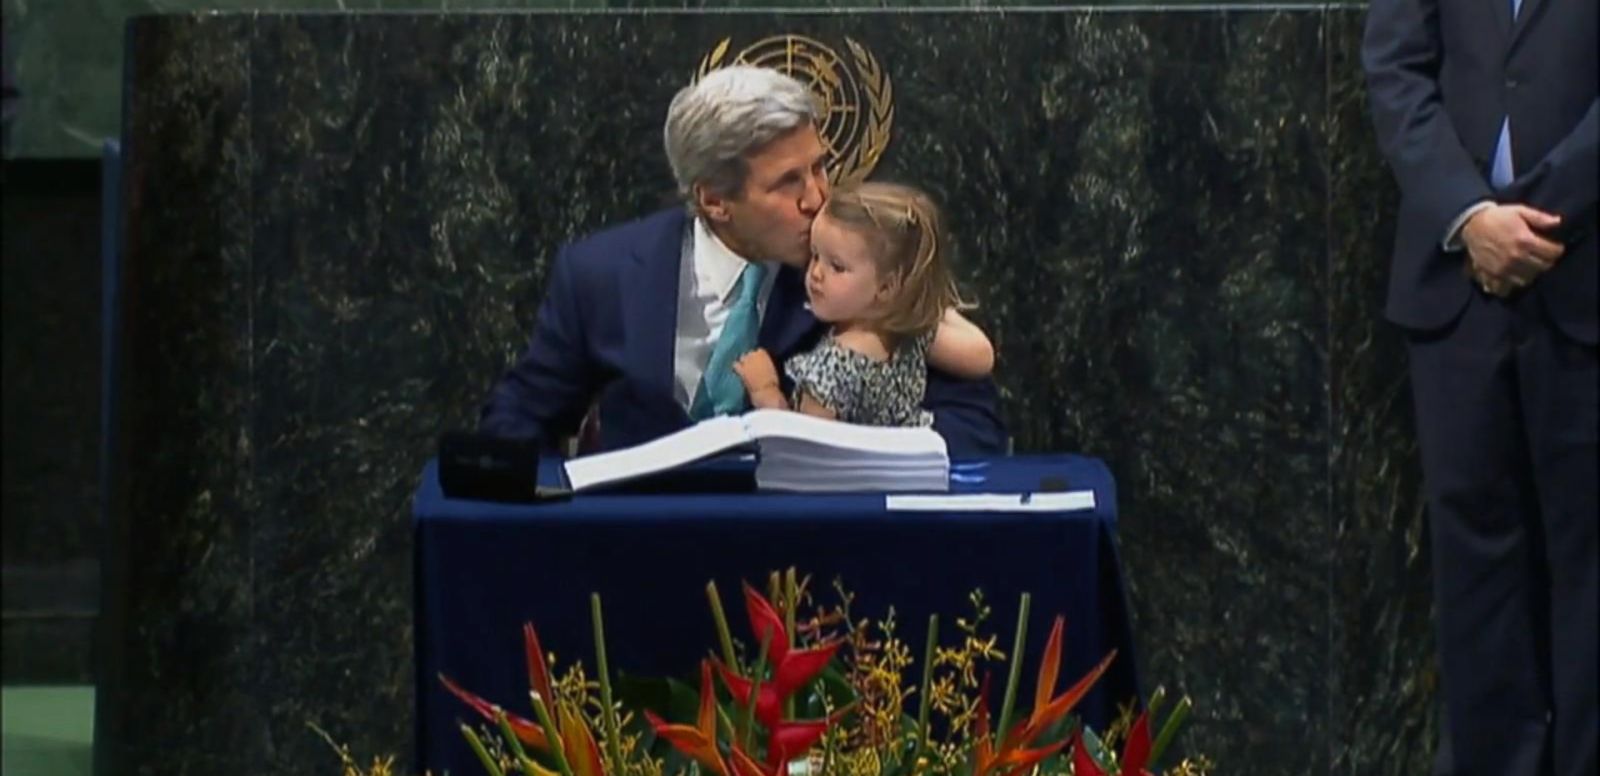 VIDEO: John Kerry Signs Paris Agreement With Granddaughter on Lap